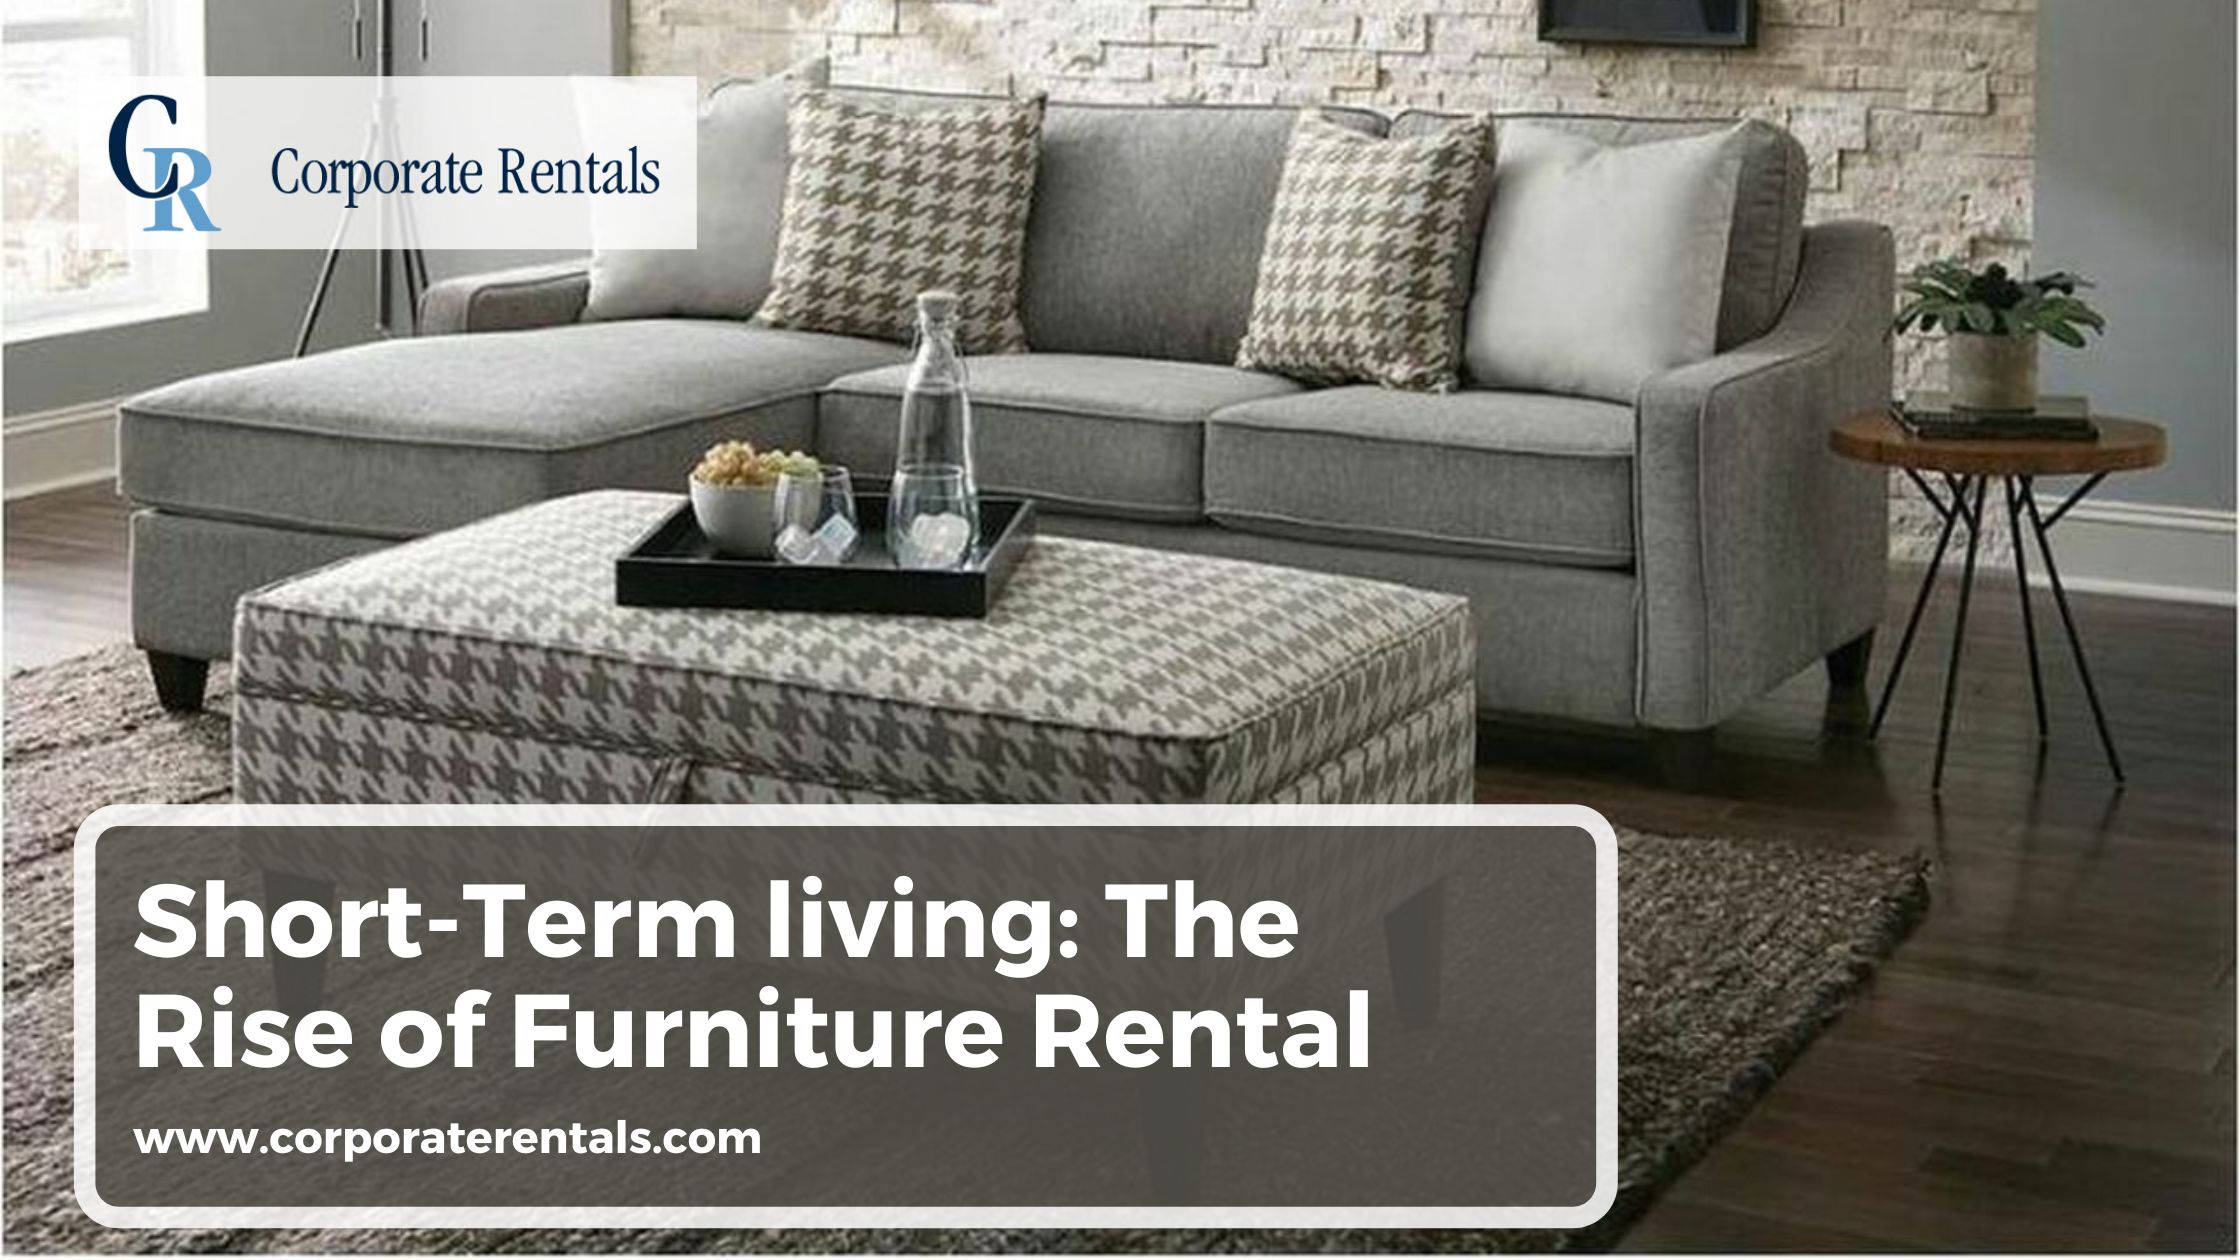 Short-Term living: The Rise of Furniture Rental